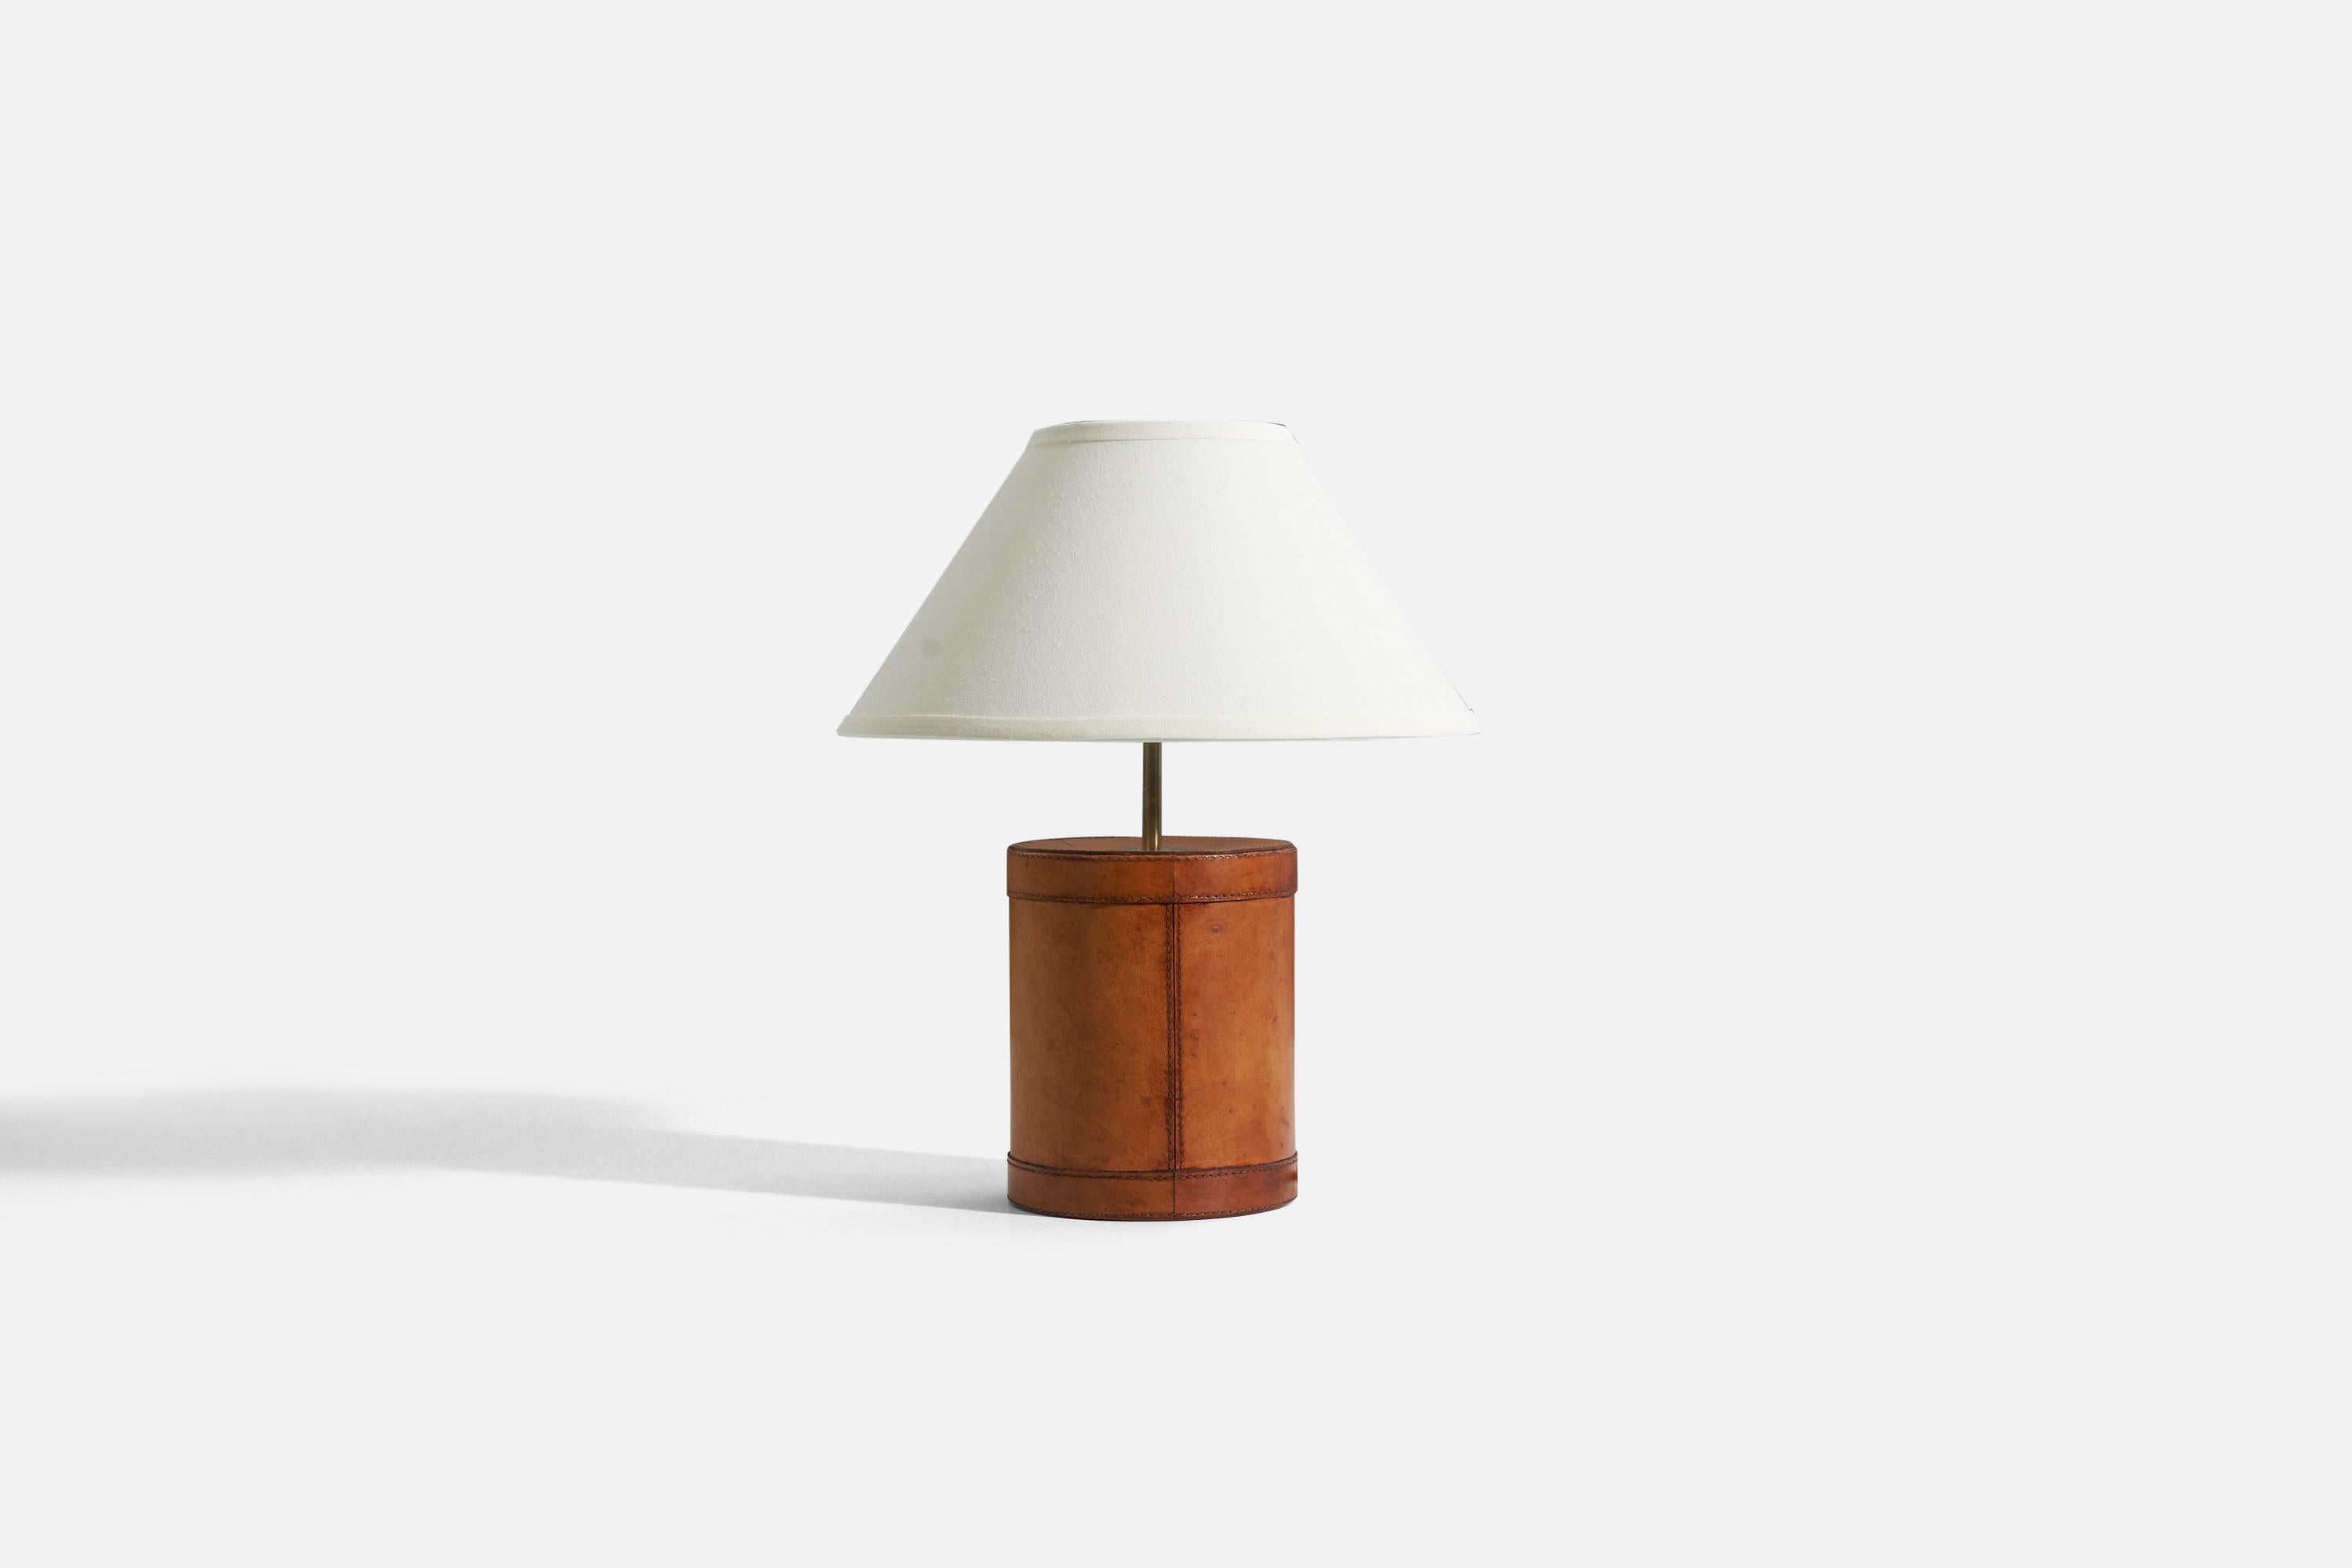 A brass and leather table lamp designed and produced by a Swedish designer, Sweden, 1960s.

Sold without lampshade. 
Dimensions of lamp (inches) : 14.375 x 6.5 x 6.5 (H x W x D)
Dimensions shade (inches) : 5.75 x 14 x 8 (T x B x H)
Dimension of